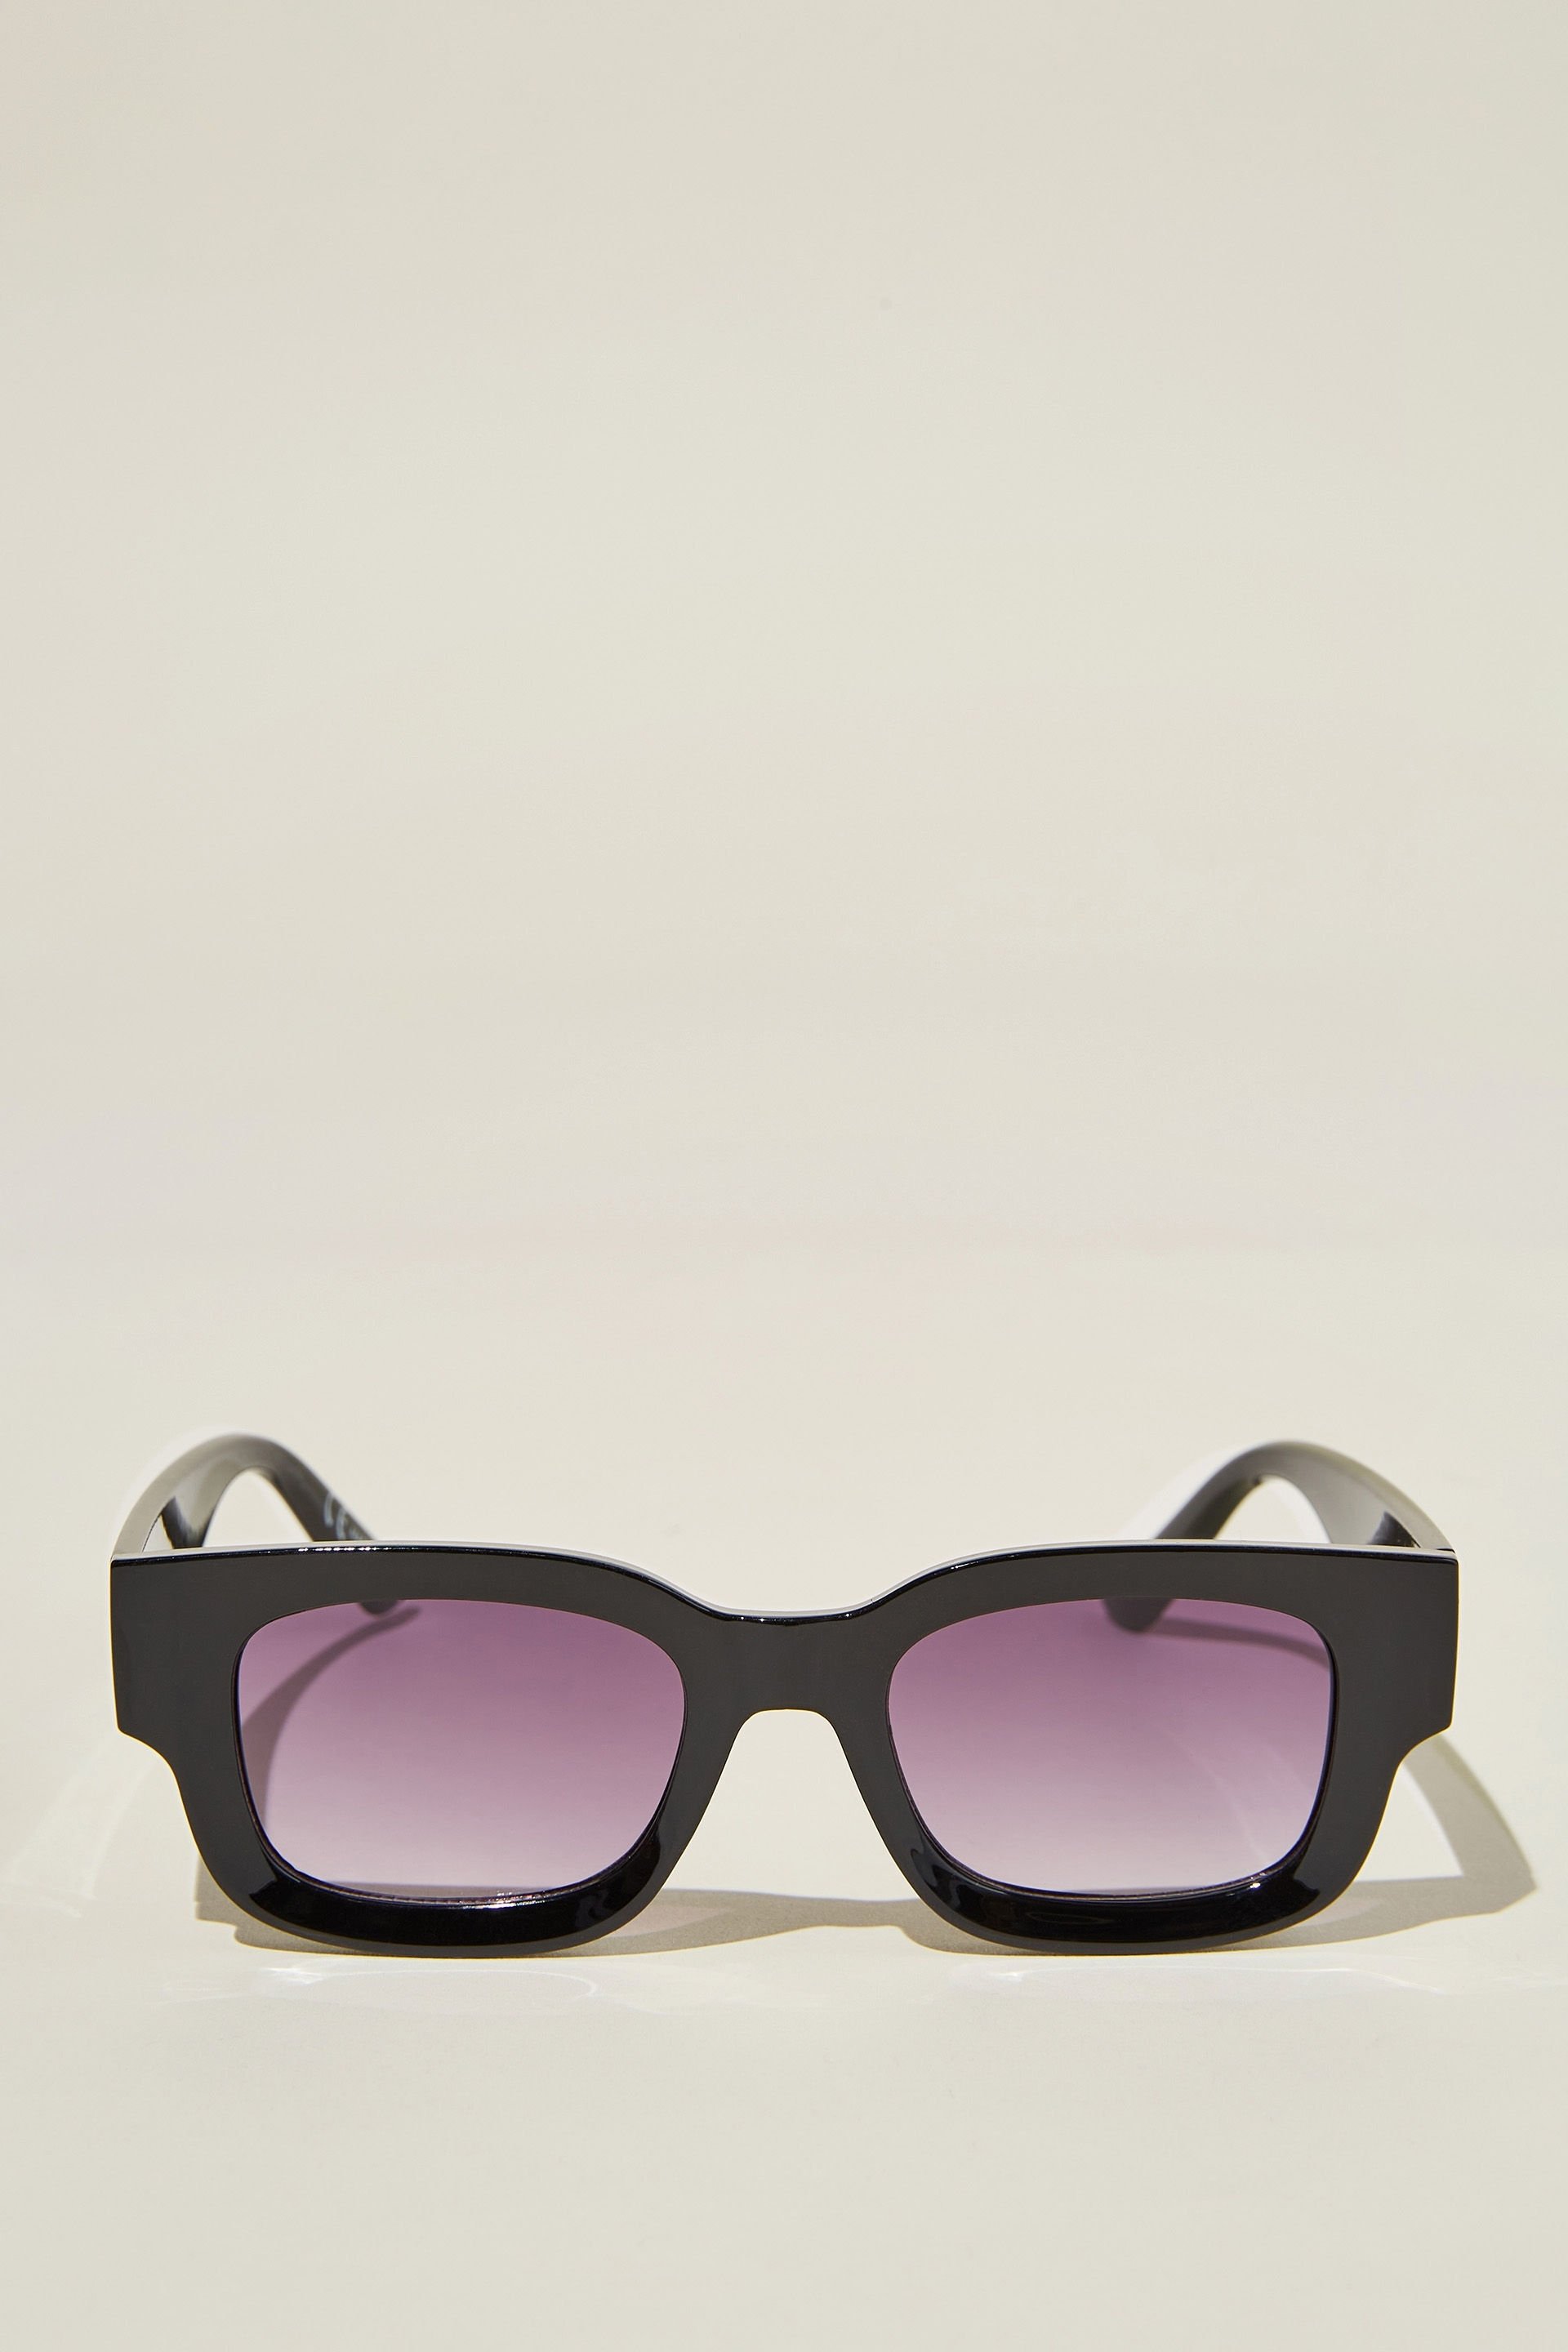 The Relax Sunglasses